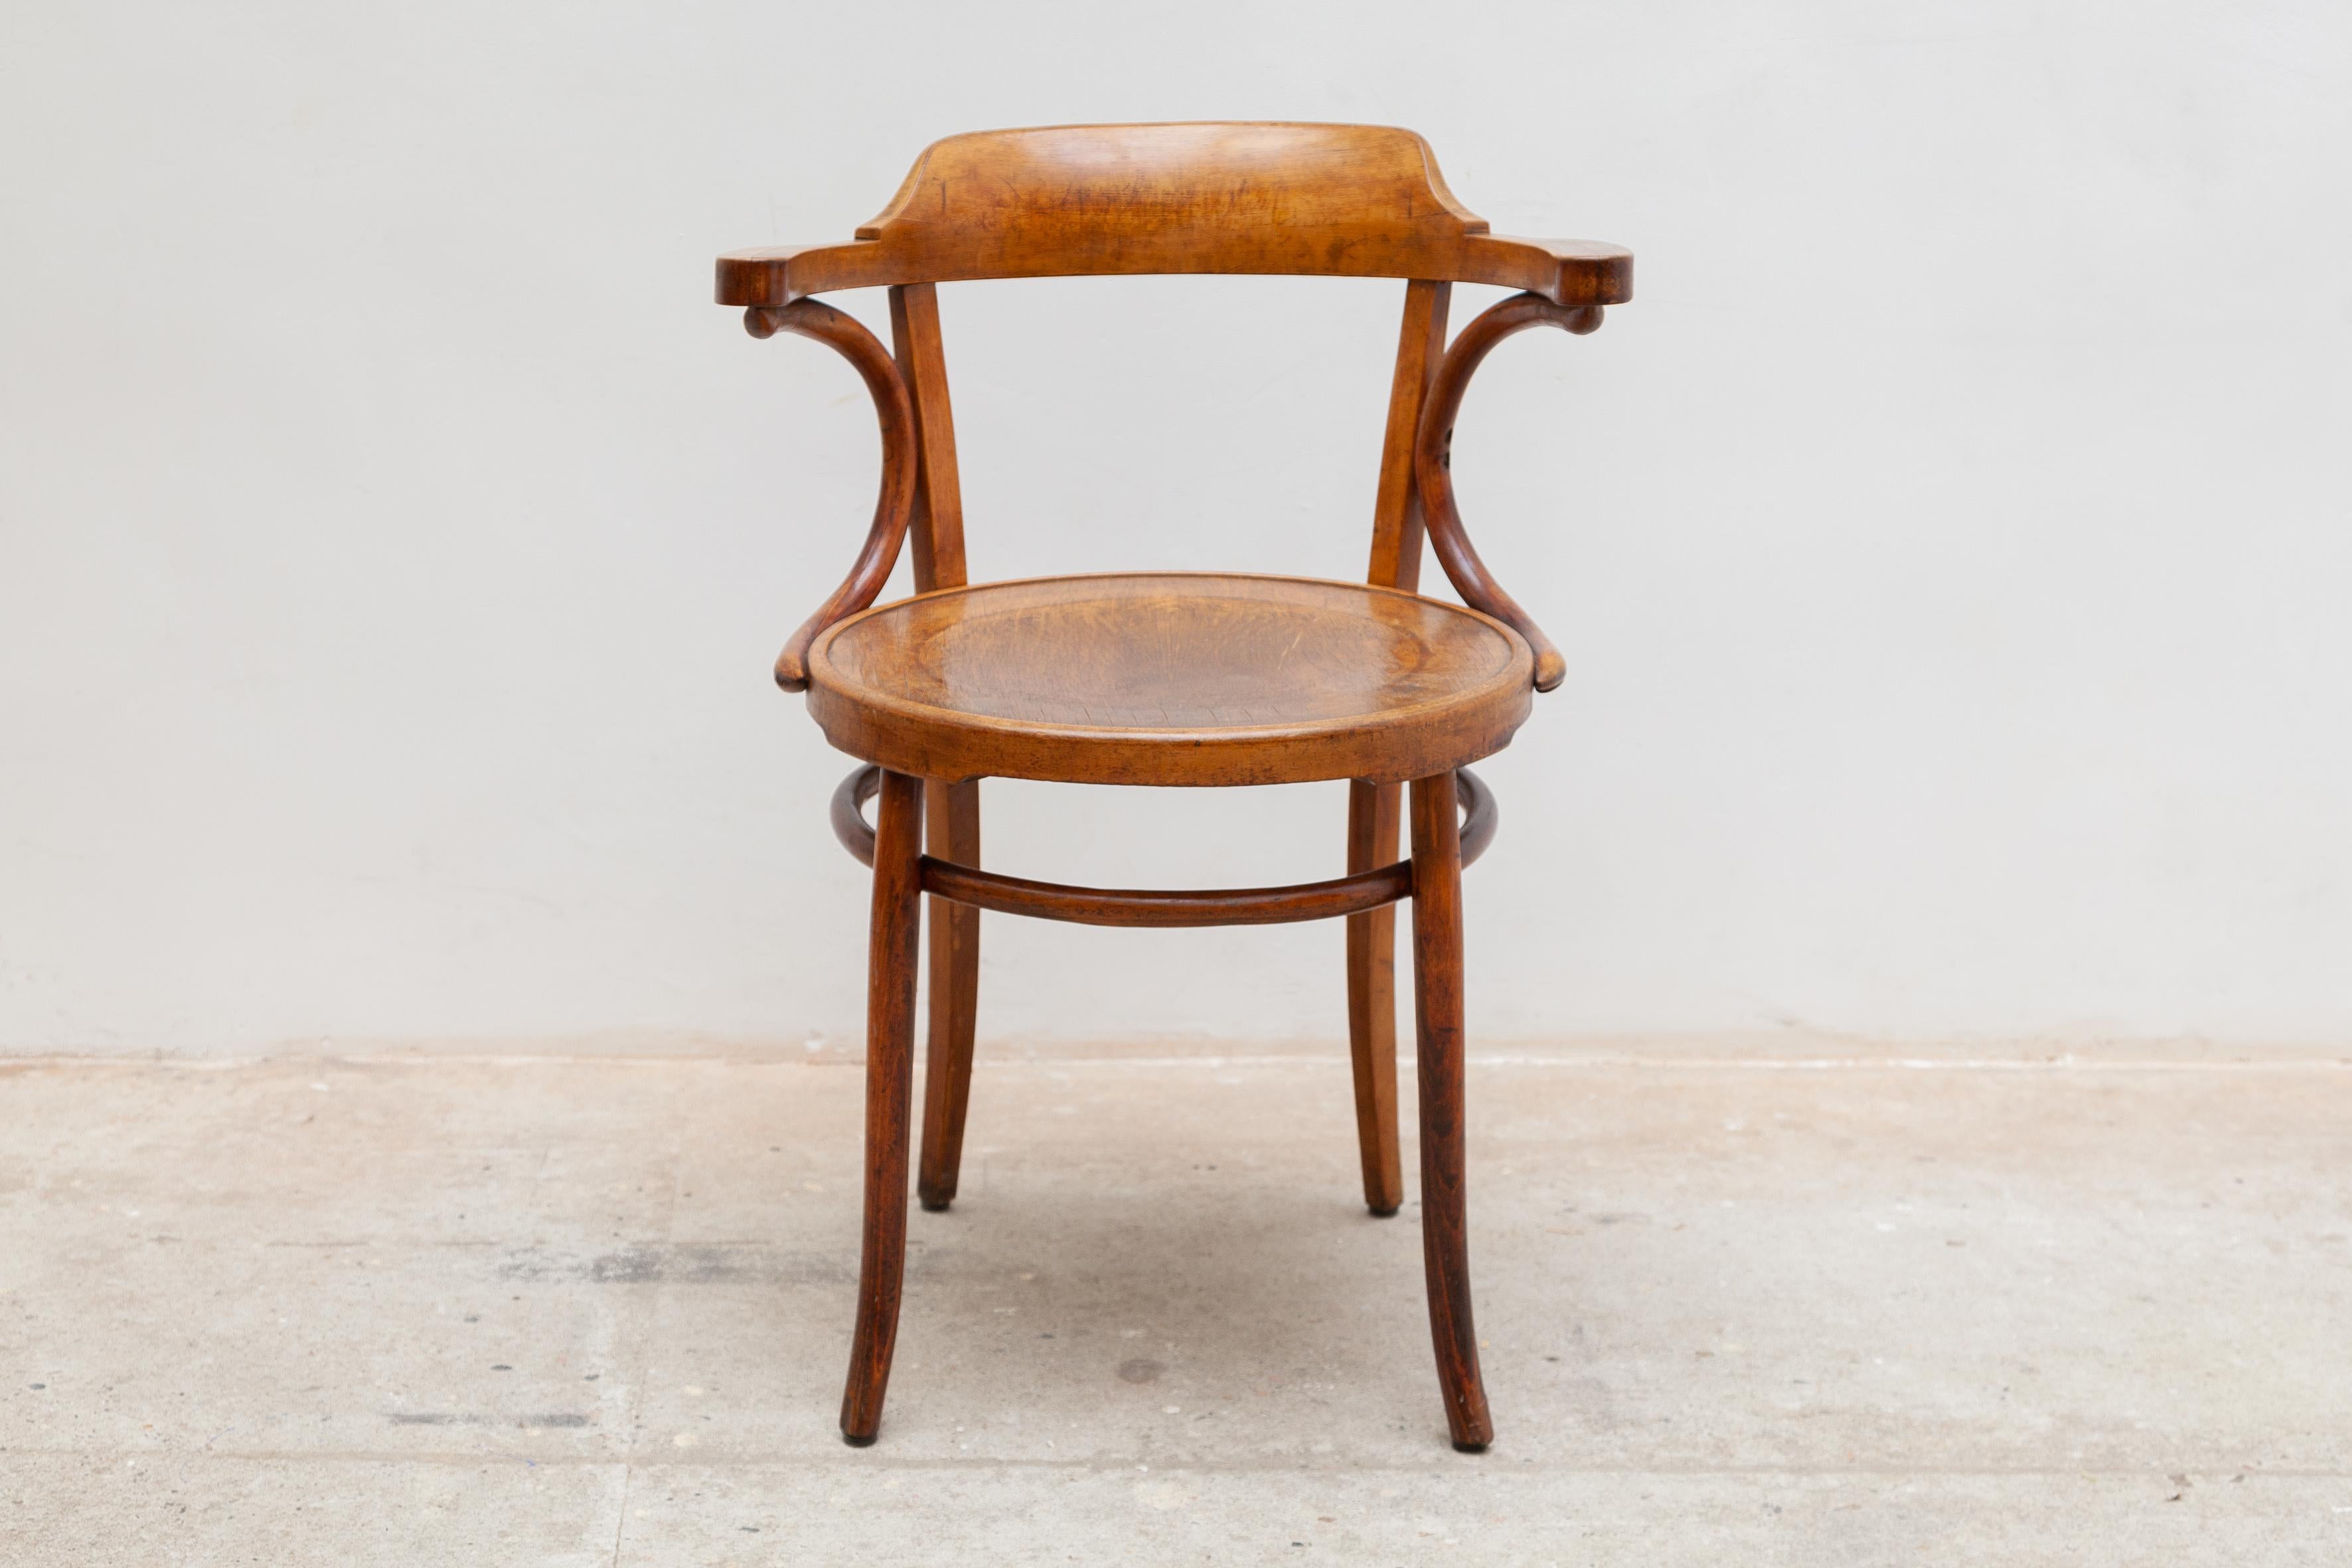 Iconic piece of bentwood open armchair. Manufactured in Austria by the Gebrüder Thonet Company. Steamed timber frame, impressed ply seat, unrestored original. The chair would be quite useful for desk chair or side chair.